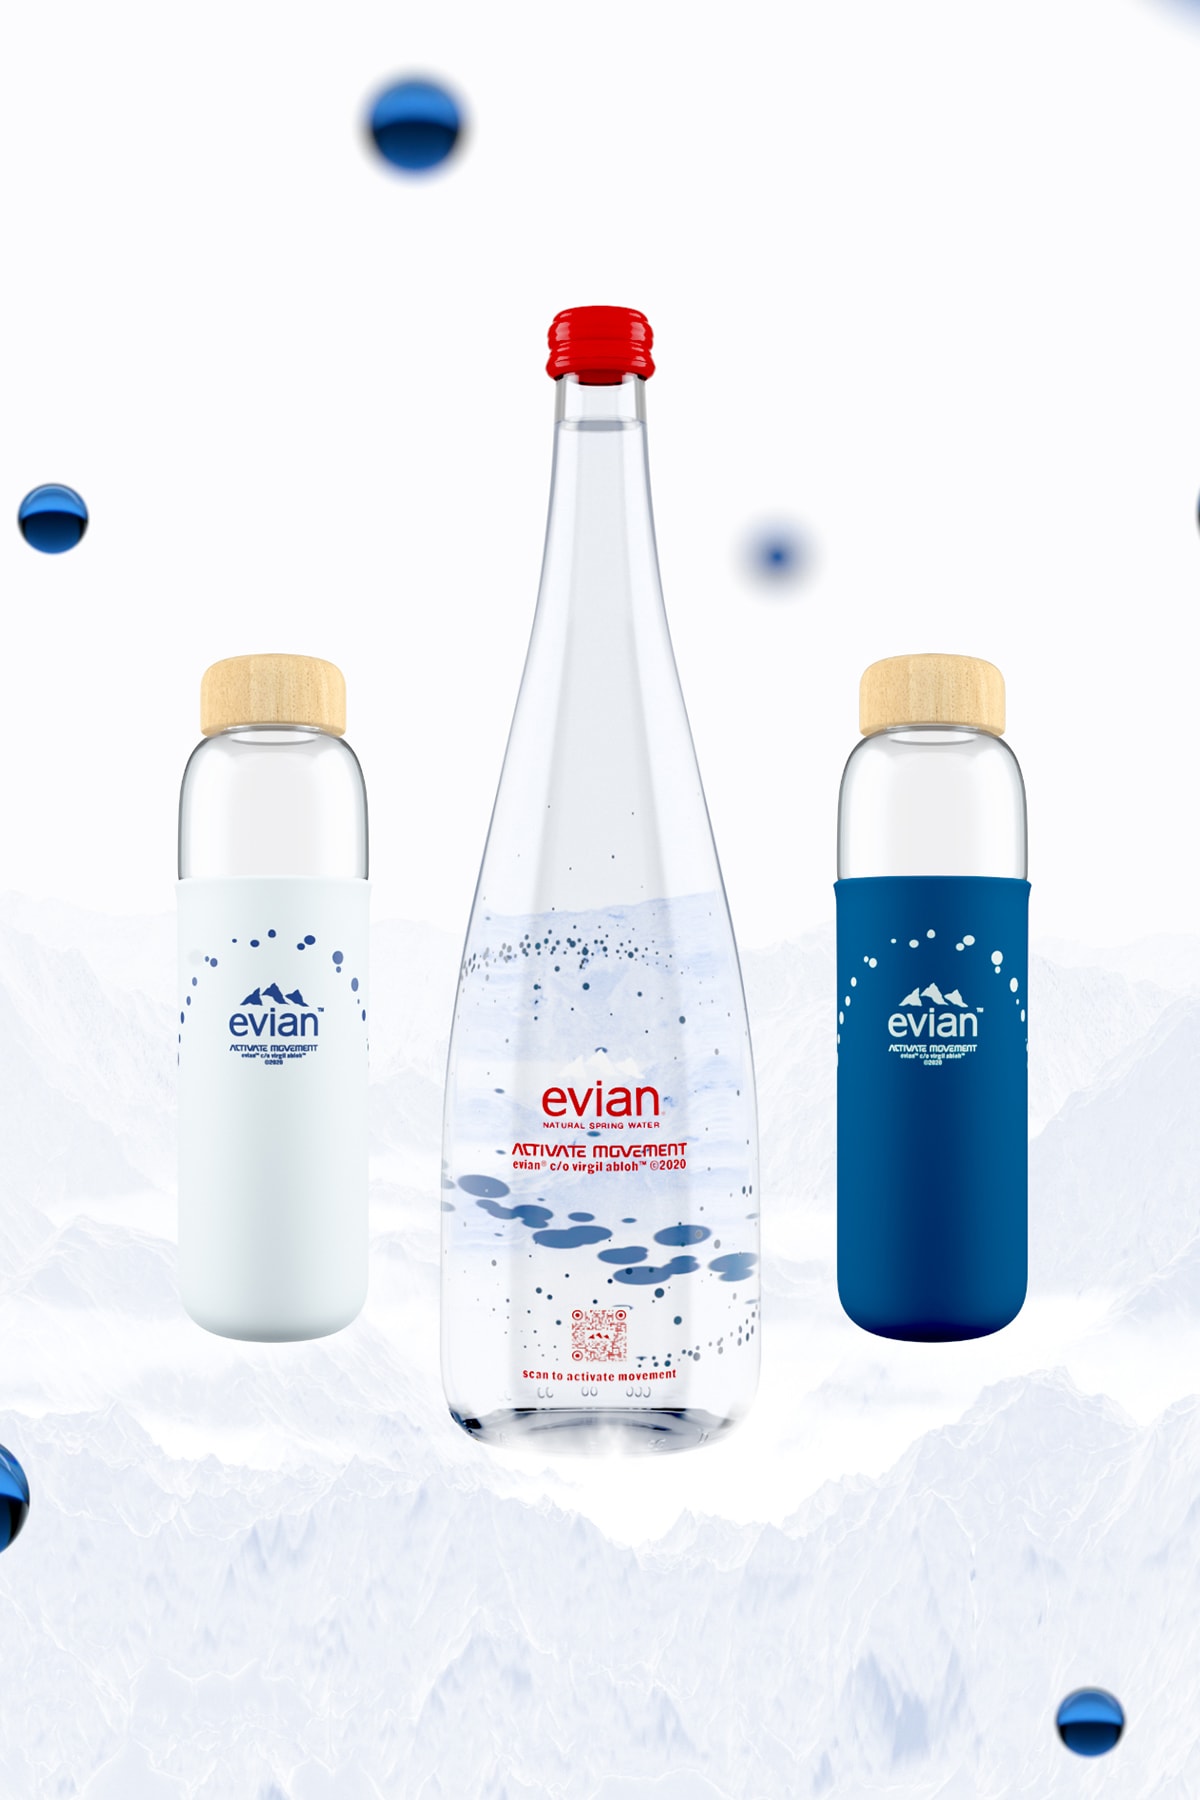 virgil abloh evian water collaboration limited edition sustainability innovation contest new york fashion week nyfw